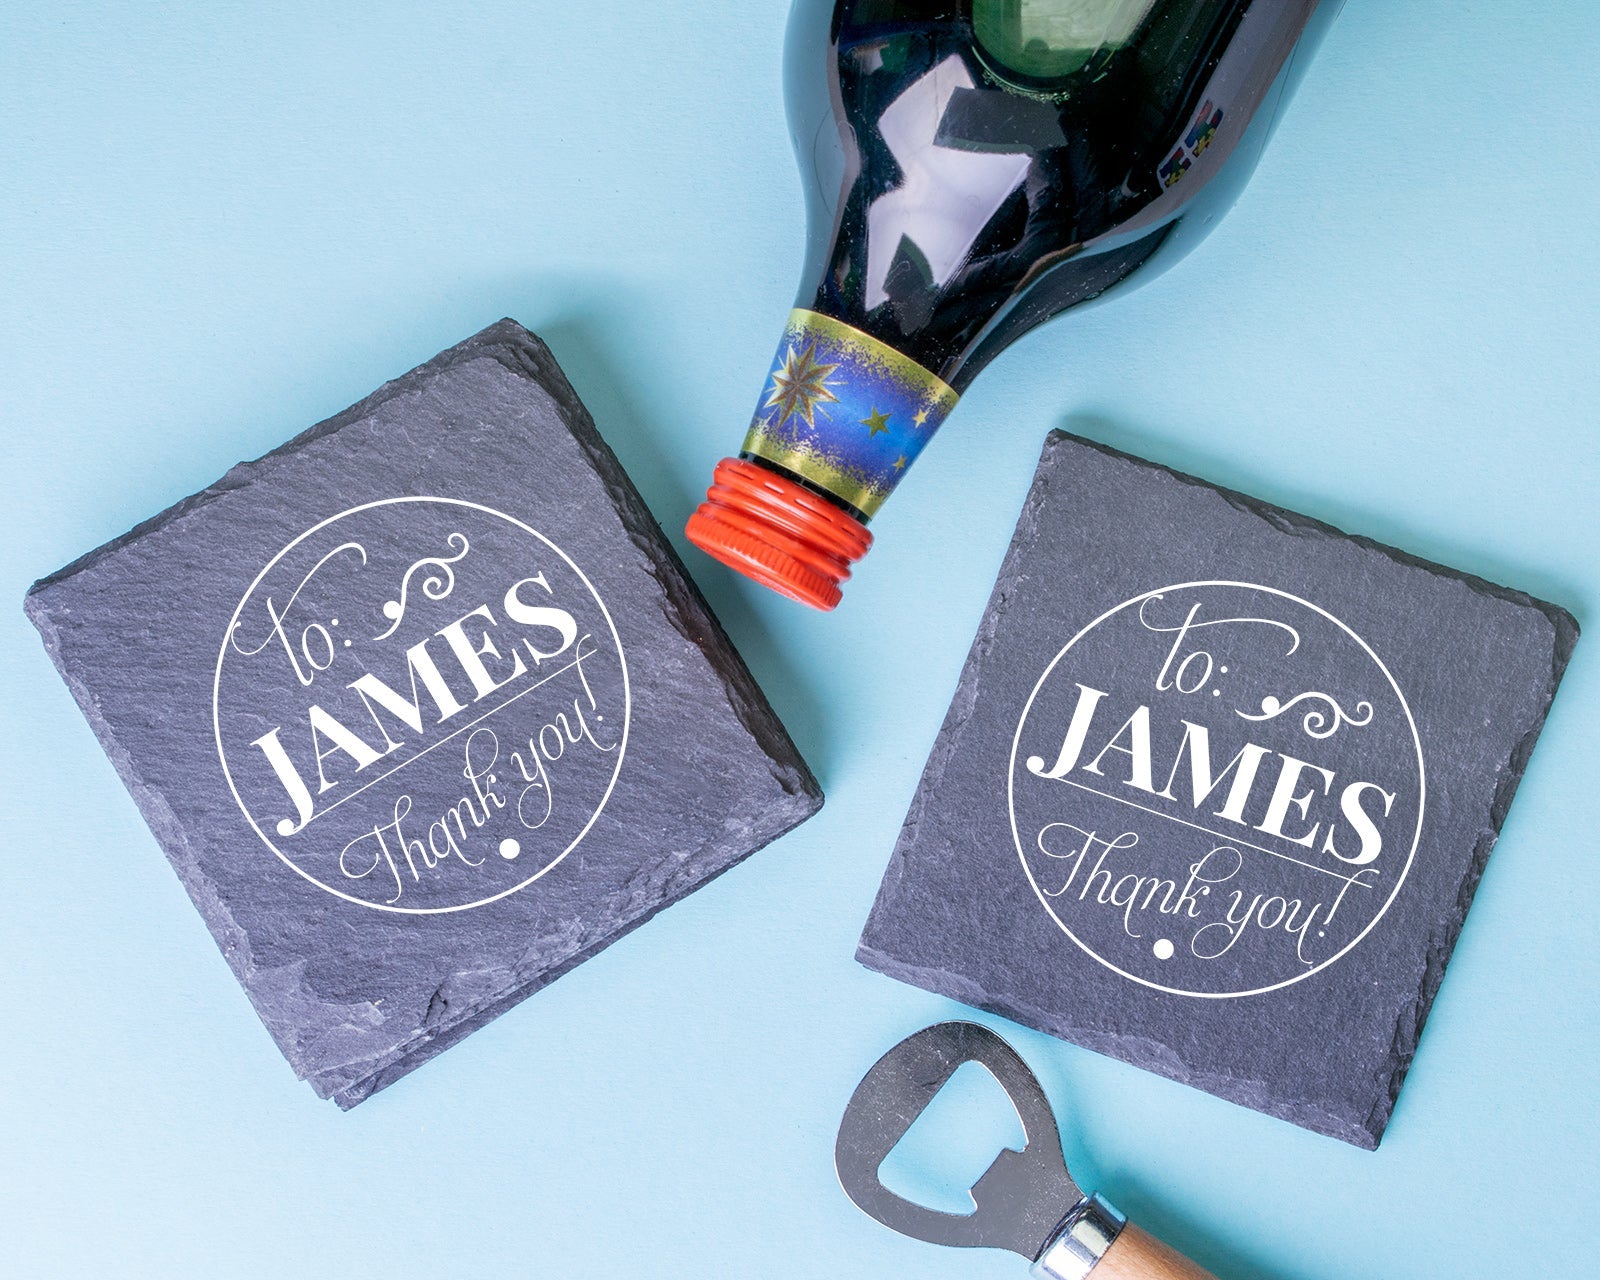 Personalised Engraved Slate Coaster Square - Drinks on me!